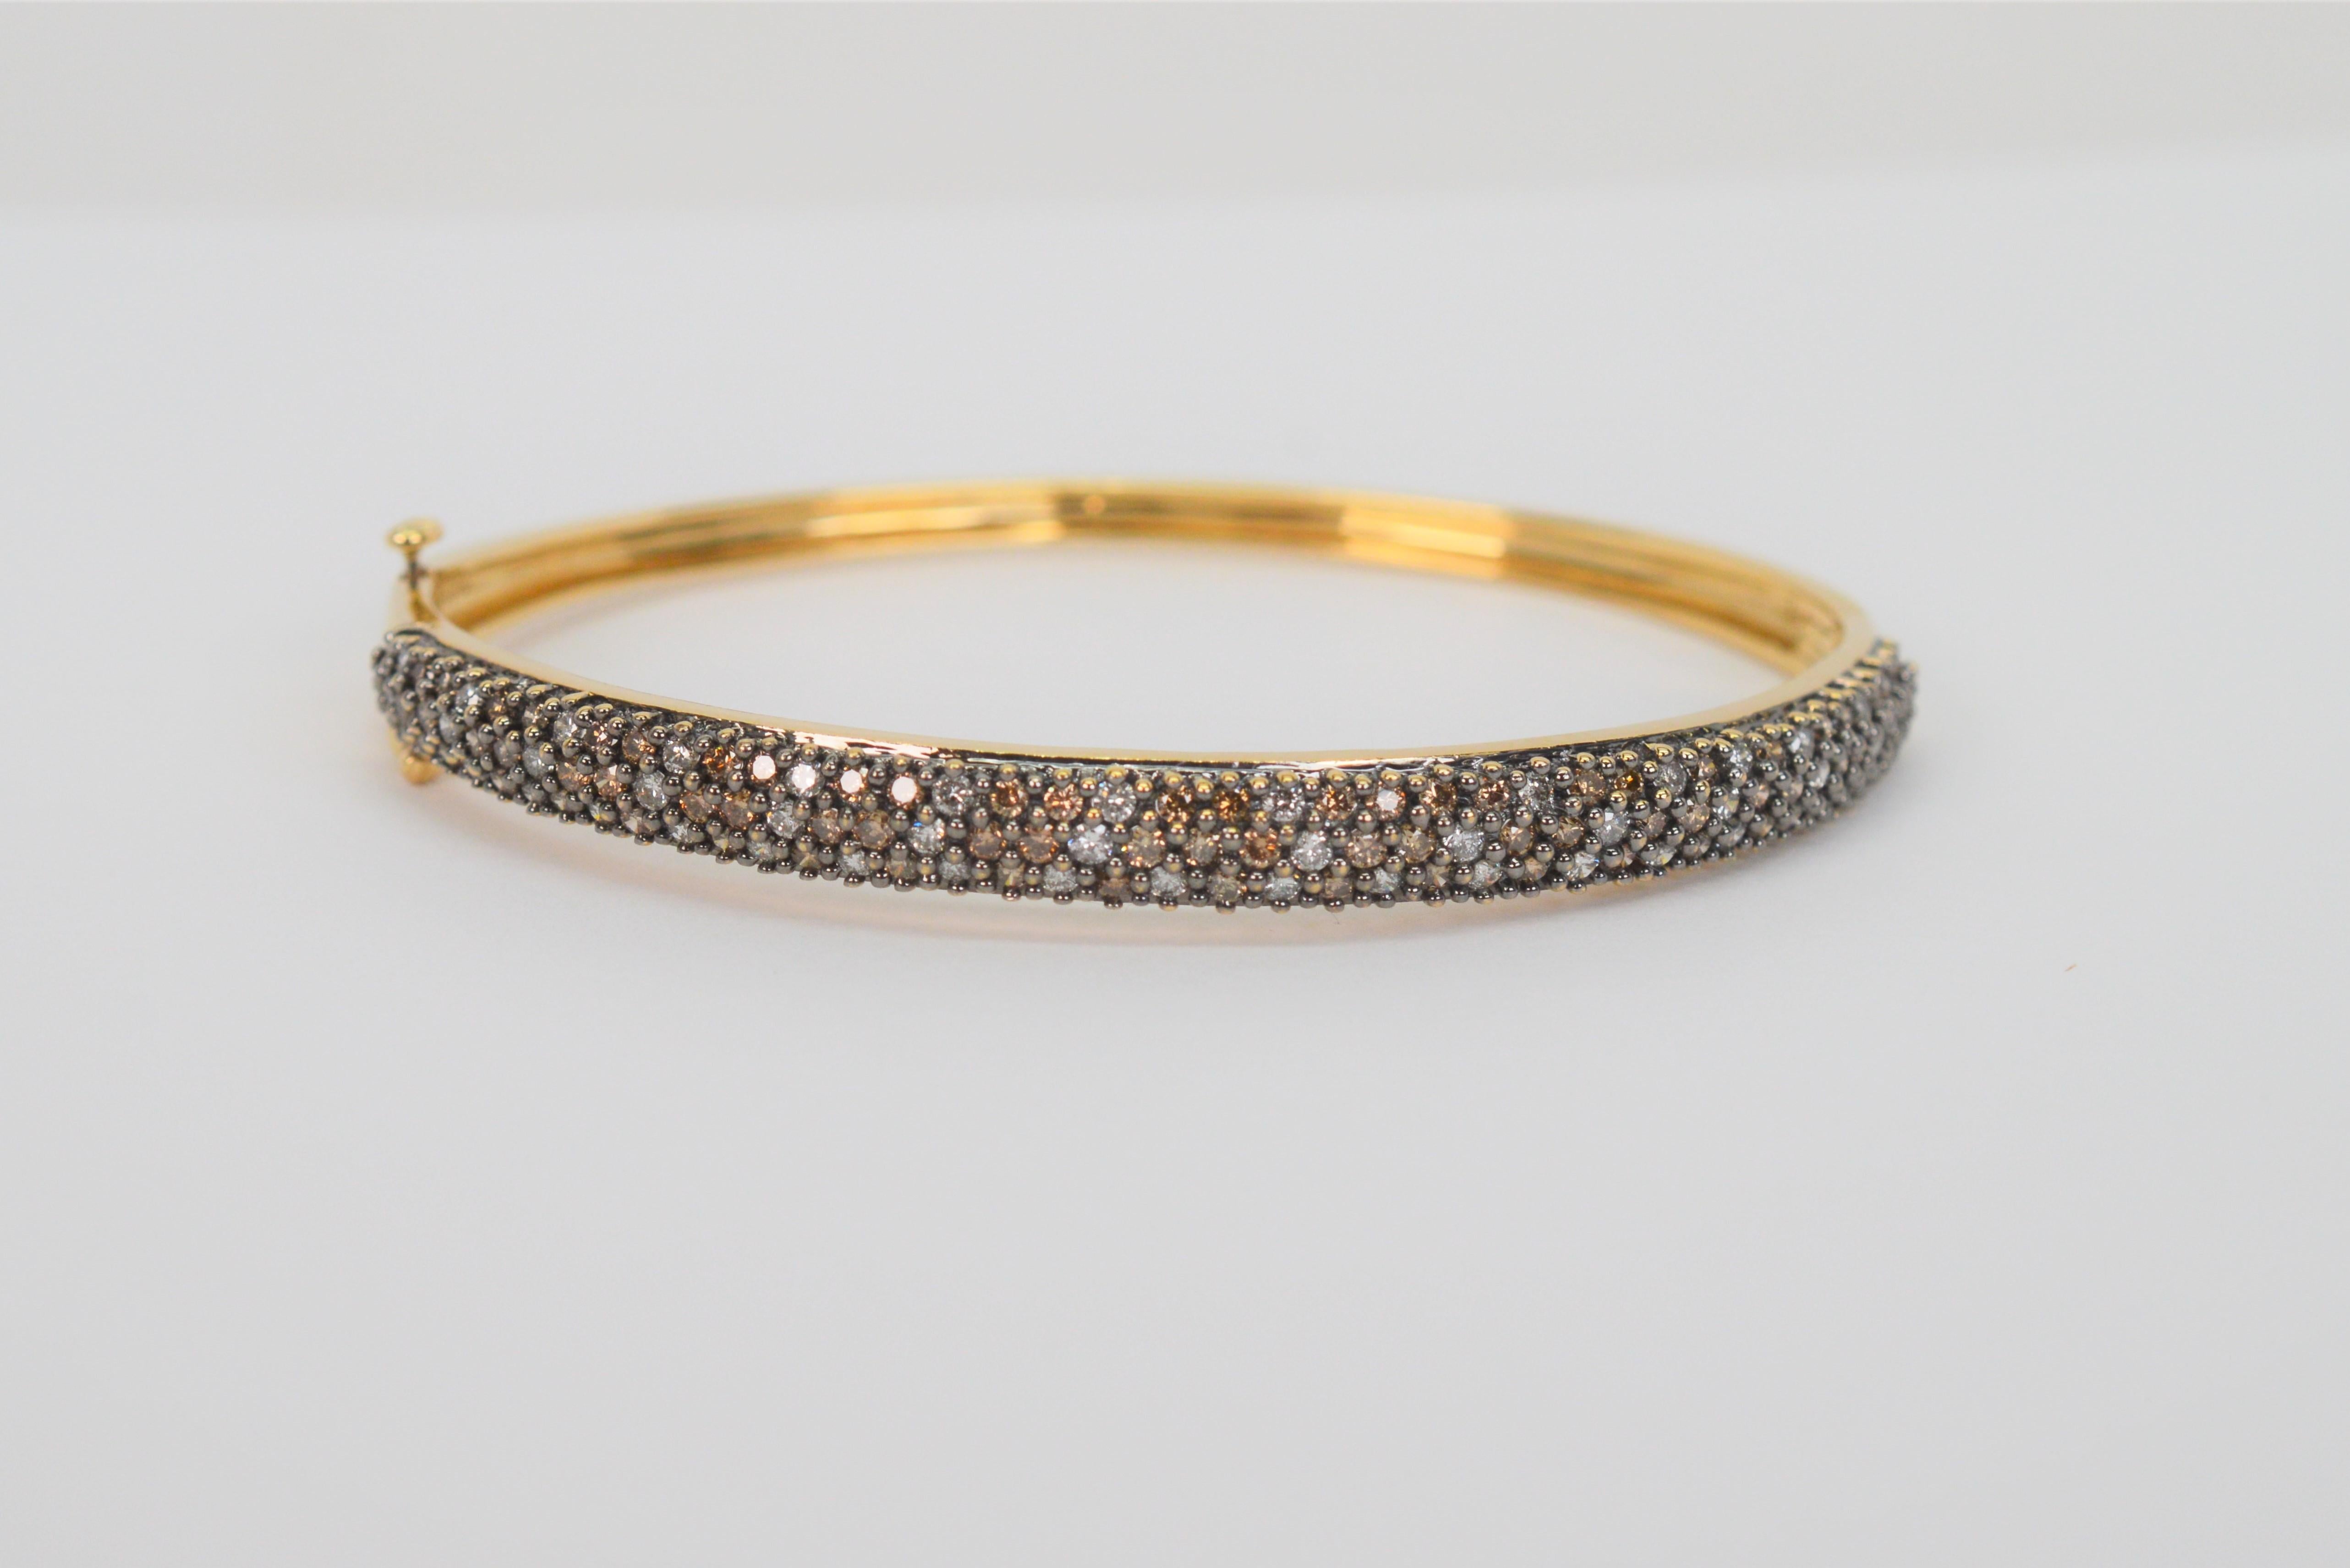 Love the sparking sophistication of this slender bangle bracelet adorned with a dazzling display of hand set pave espresso and white diamonds in 14 karat yellow gold. The front placket of this elegant bracelet has over one carat of diamonds, 1.365